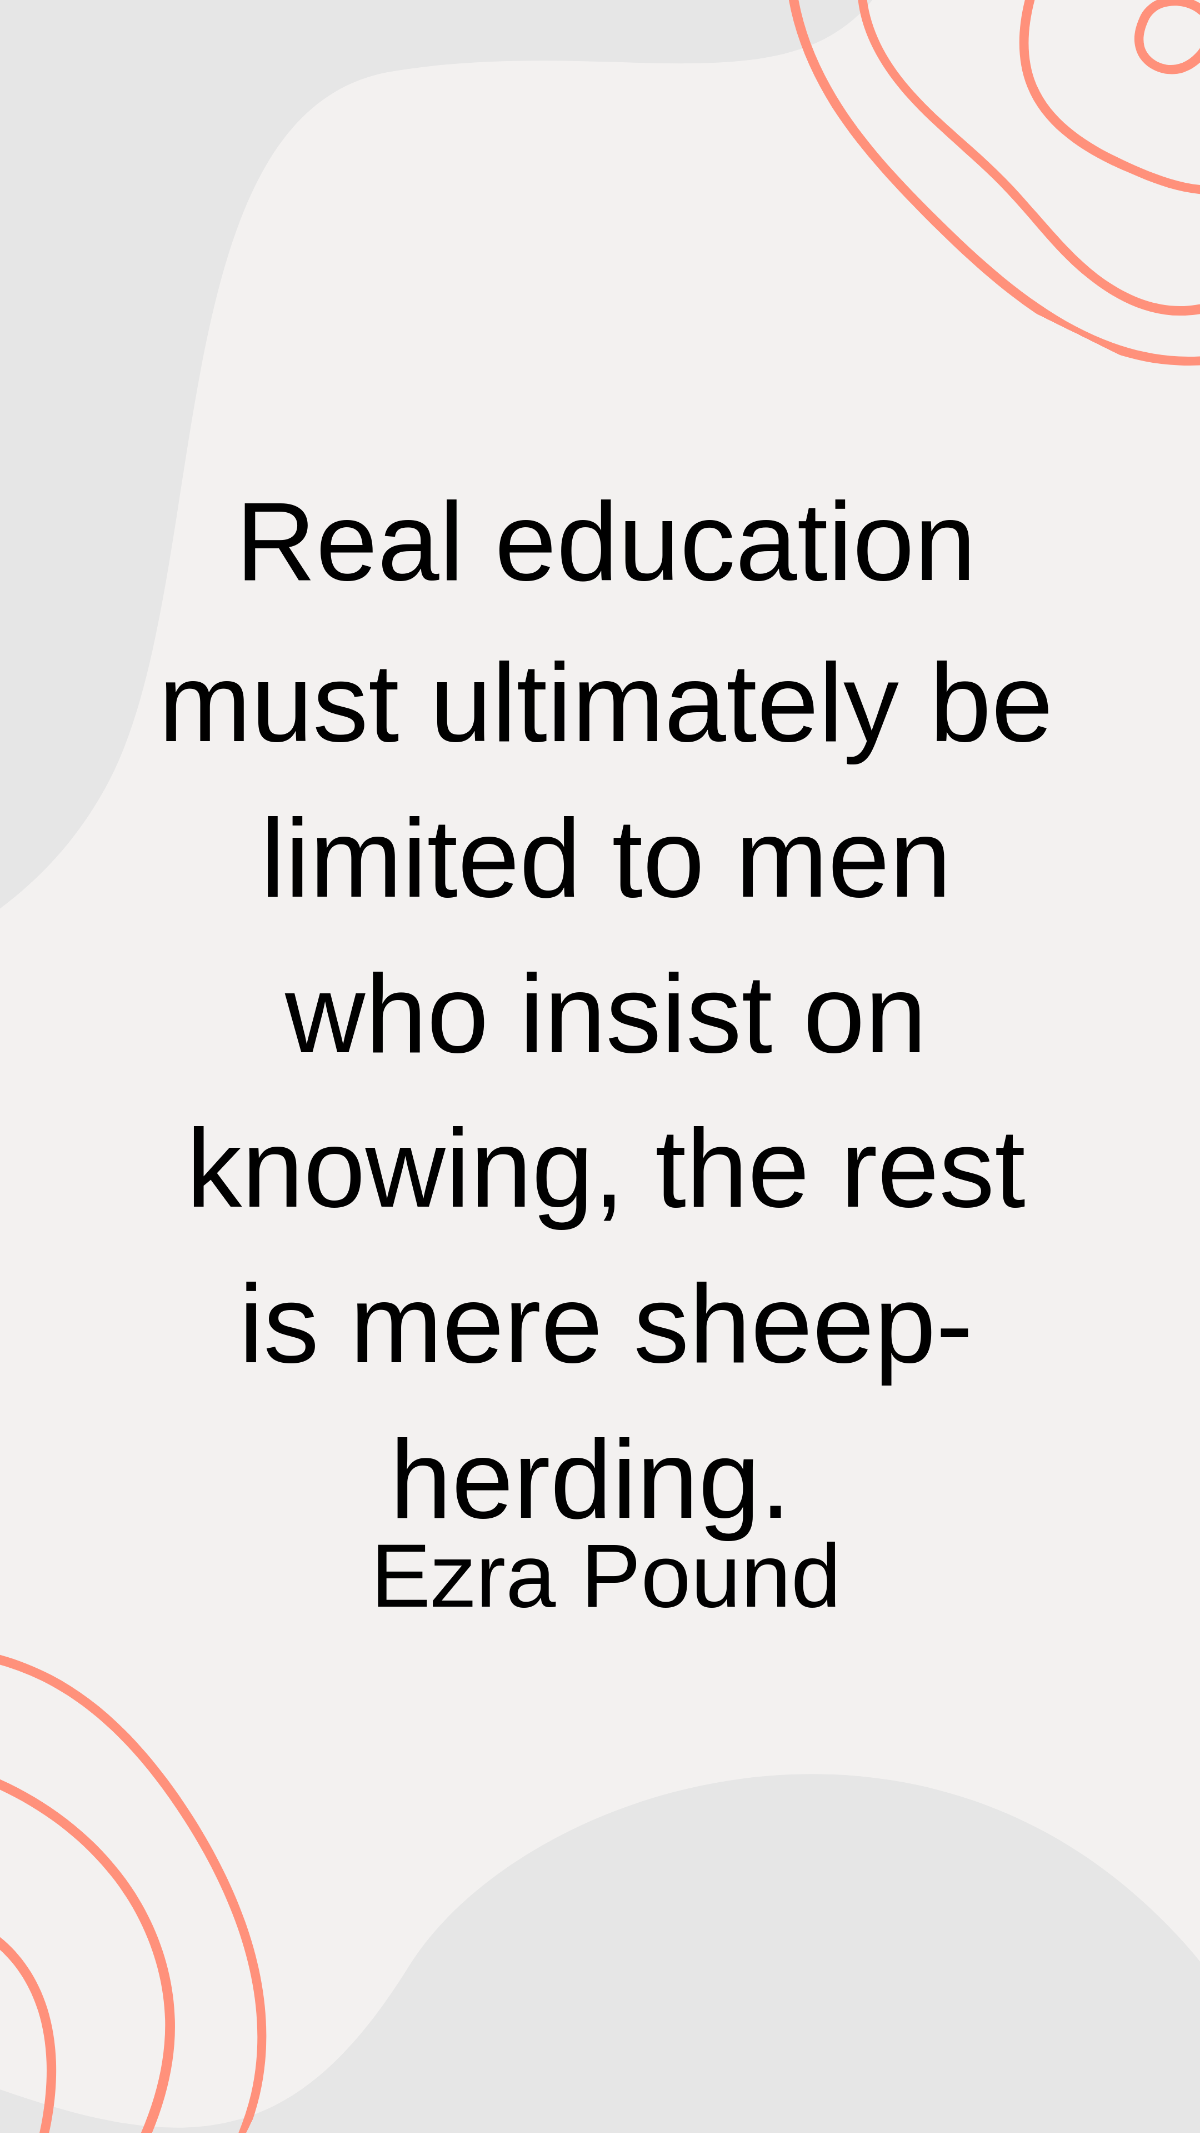 Free Ezra Pound - Real education must ultimately be limited to men who insist on knowing, the rest is mere sheep-herding. Template